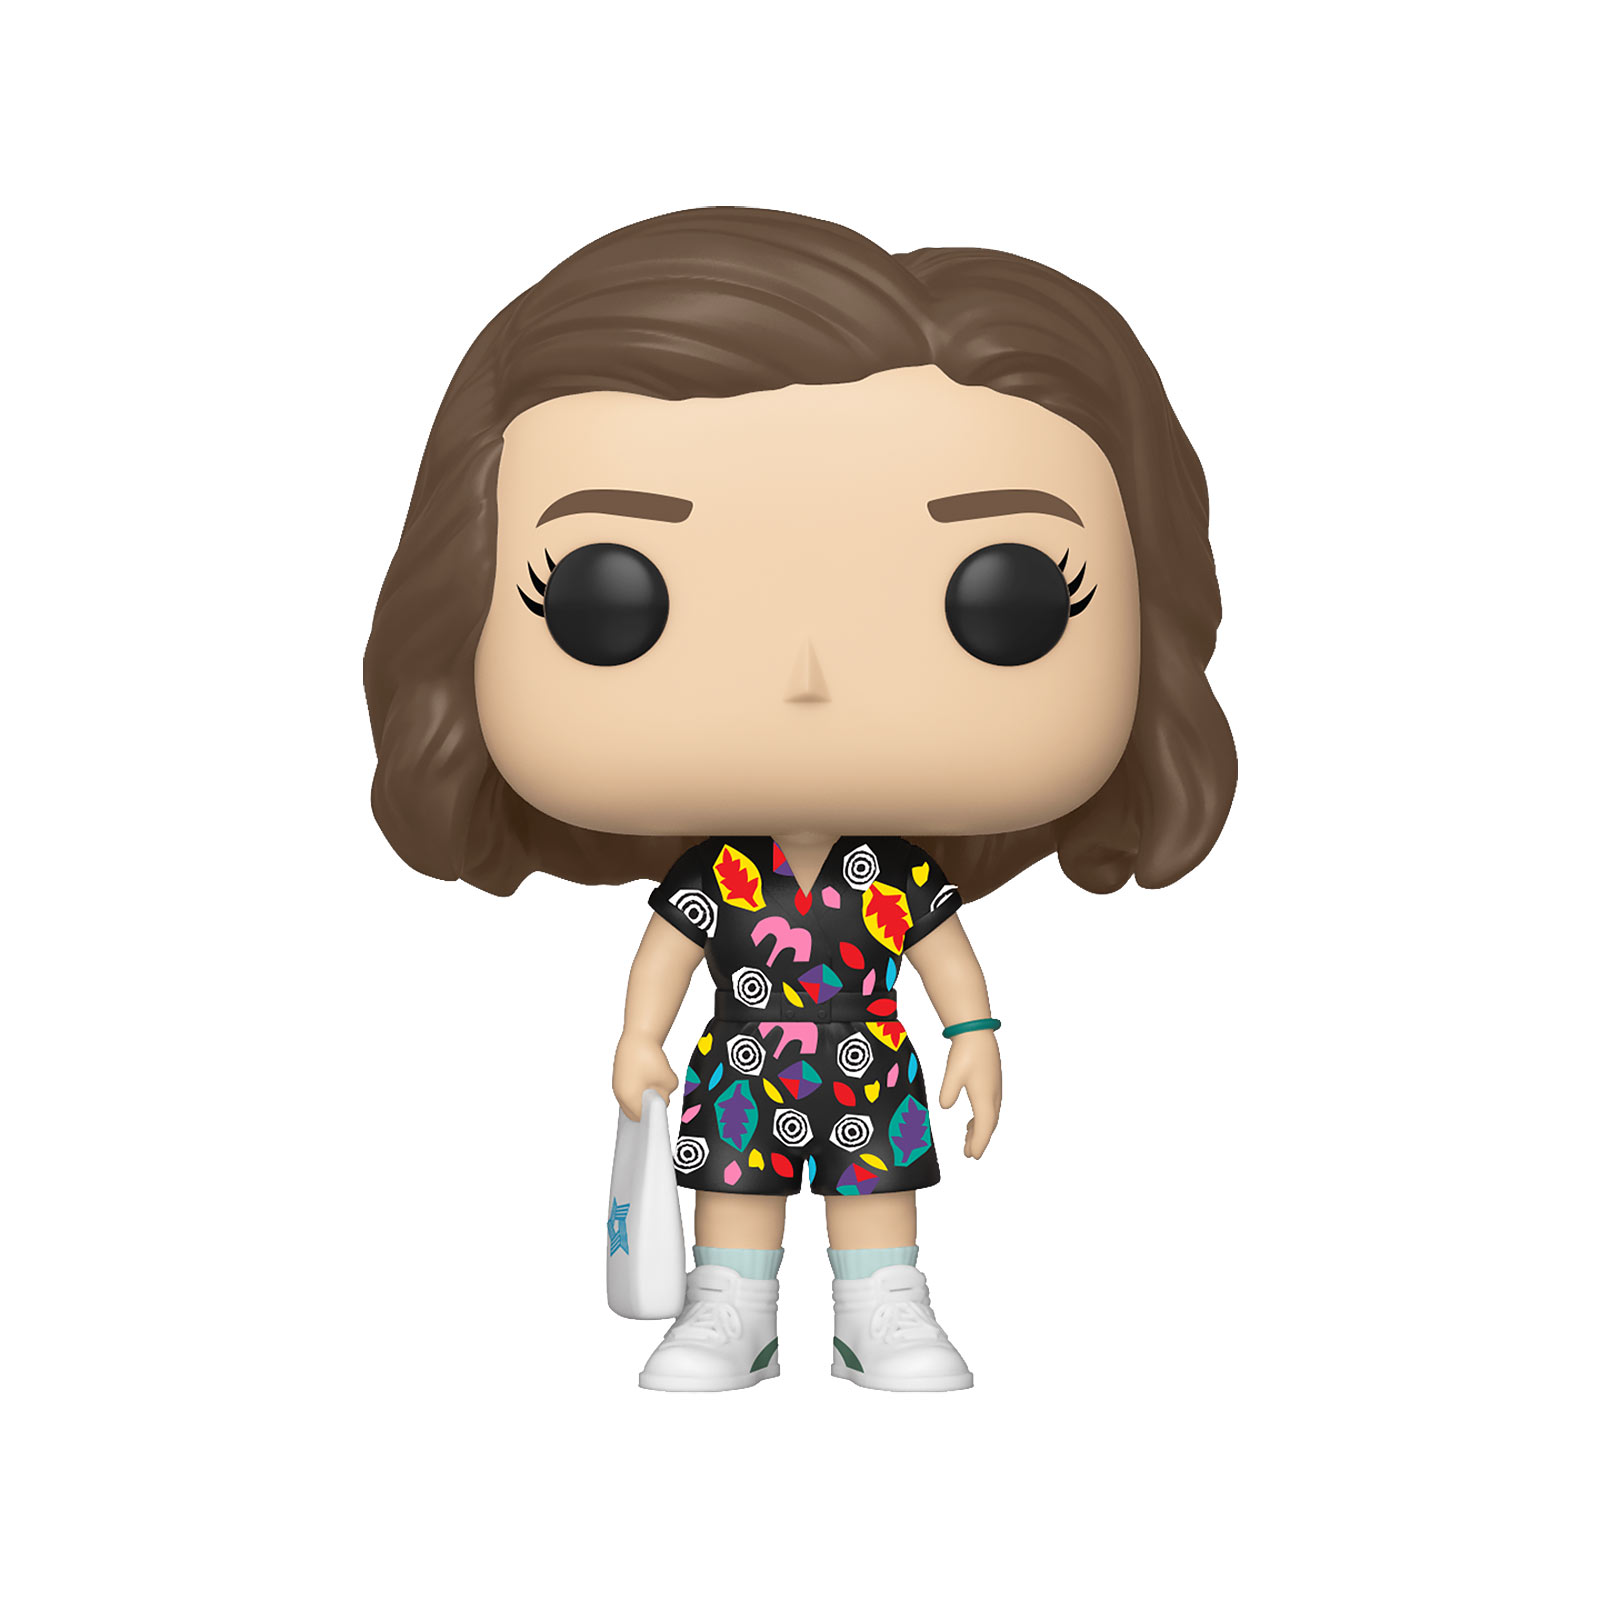 Stranger Things - Eleven in Mall Outfit Funko Pop Figur